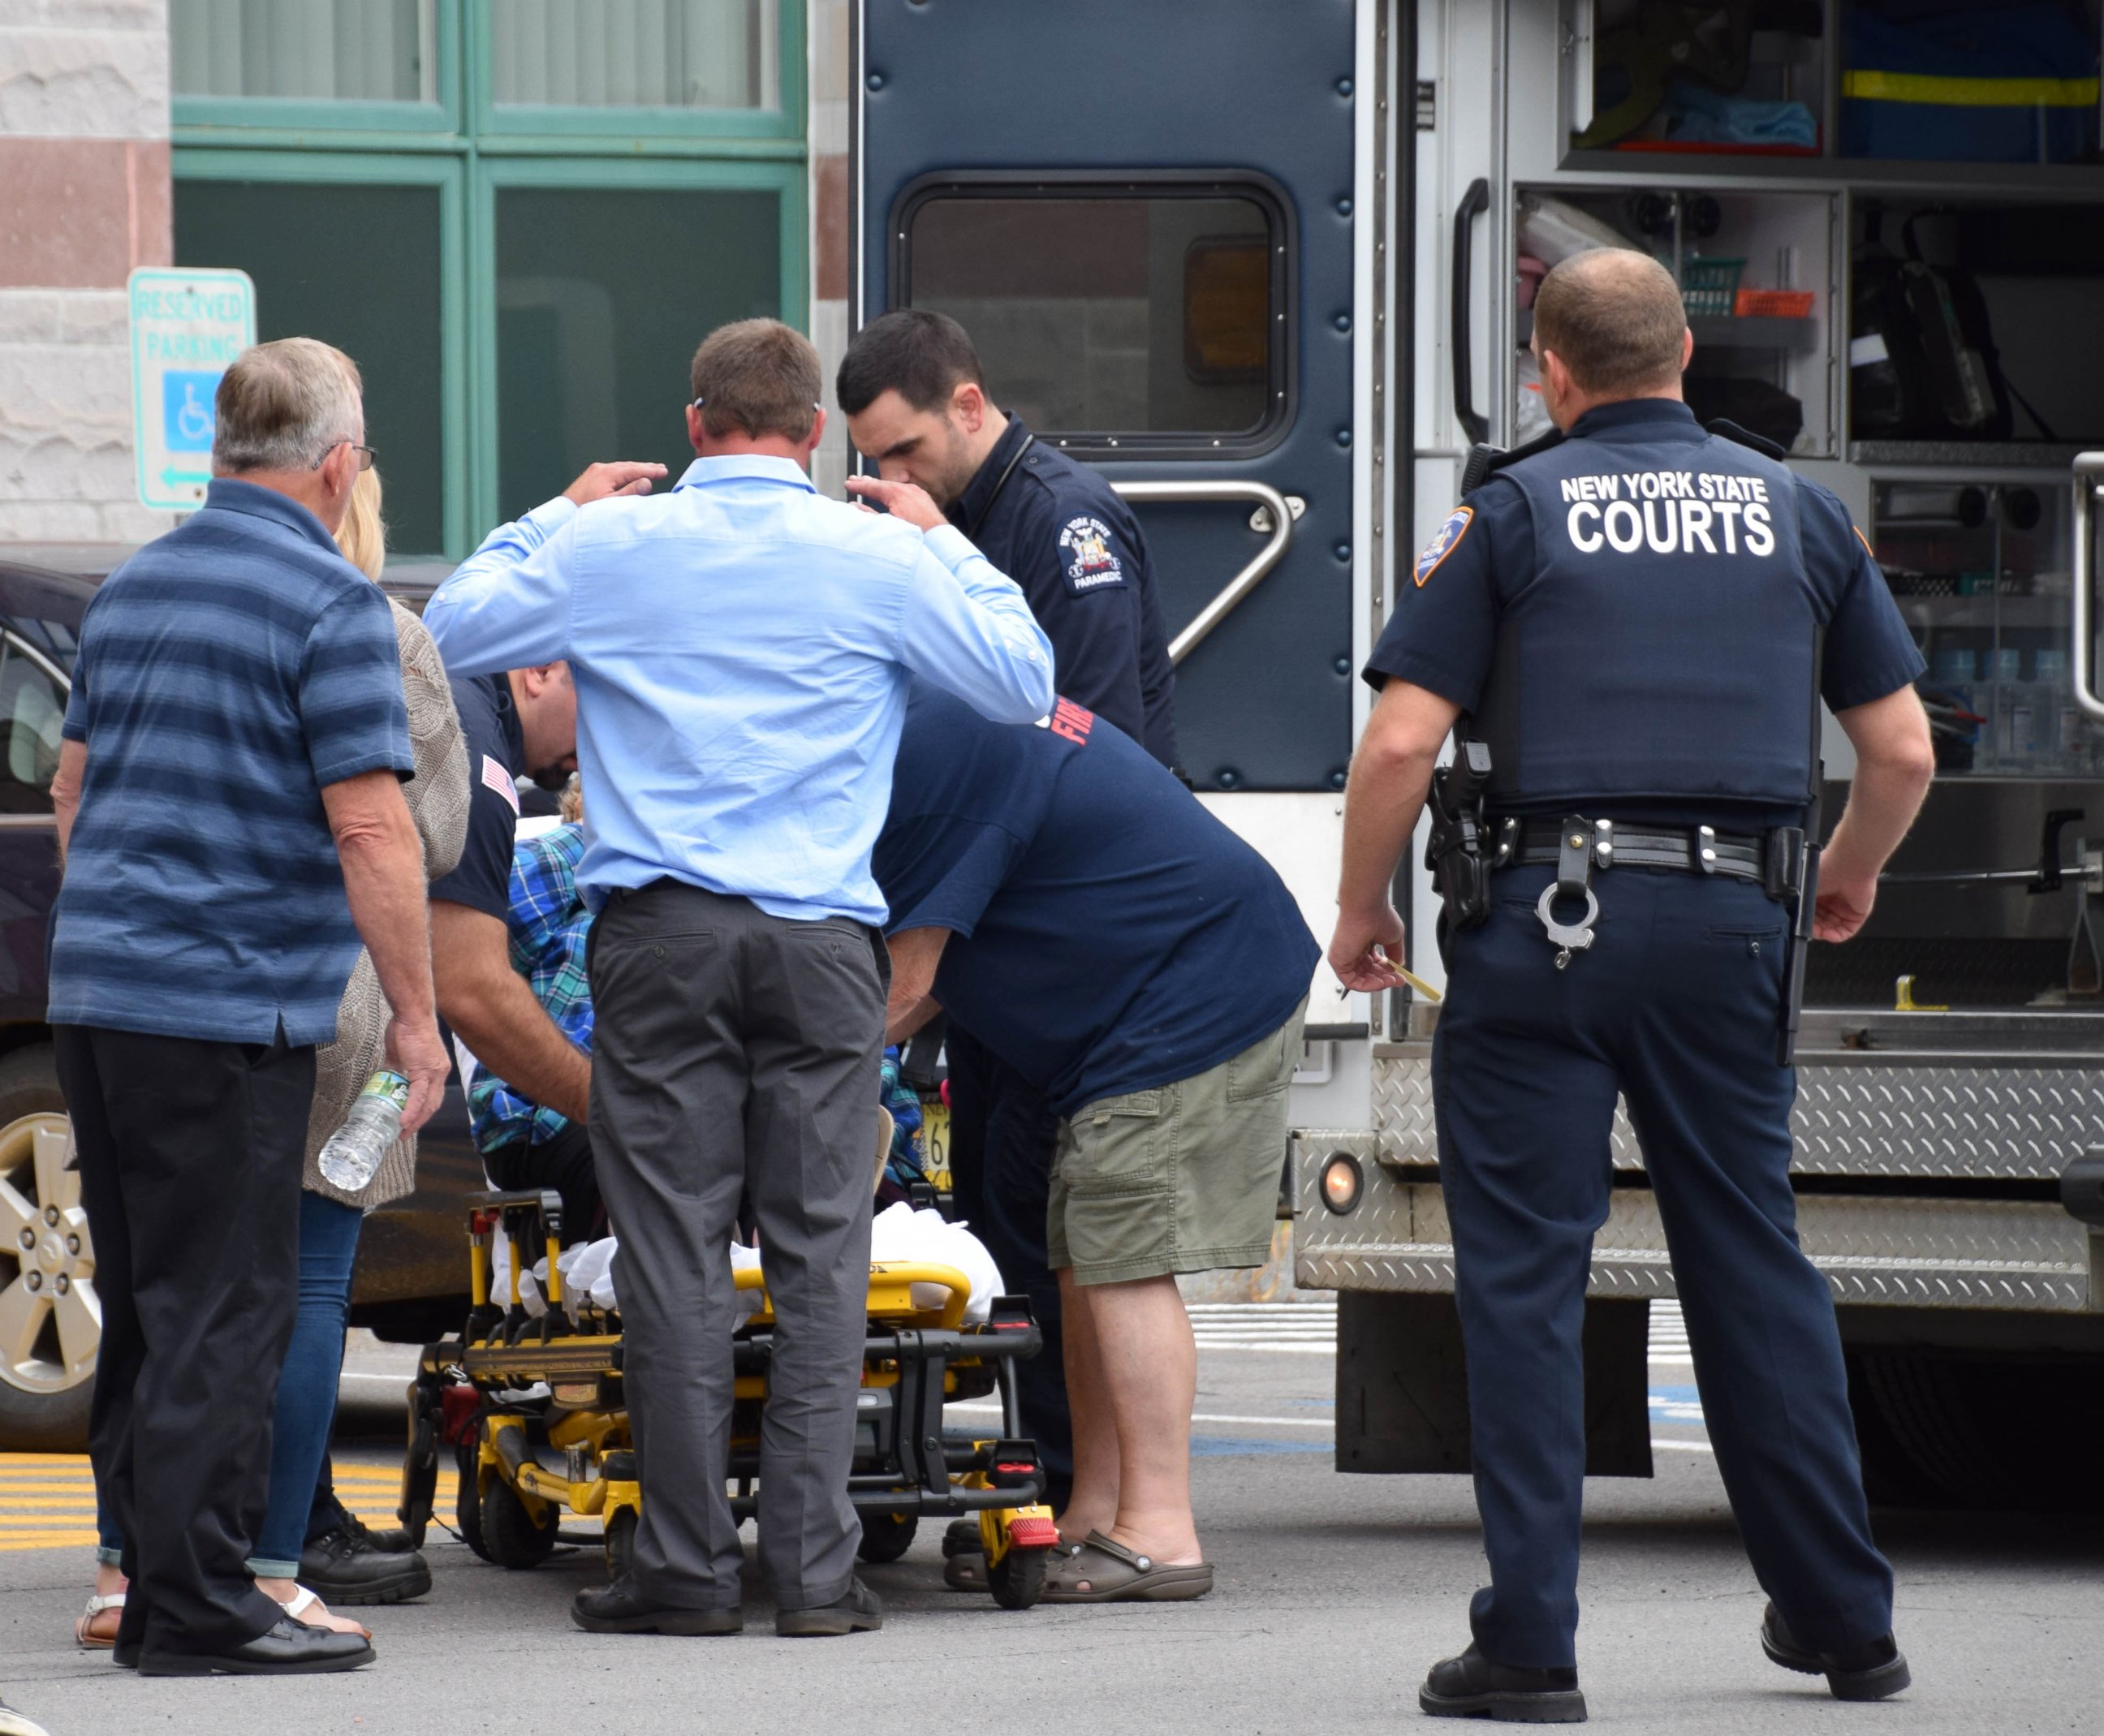 PHOTO: An ambulance is seen outside of the St. Lawrence County Courthouse in Canton, New York.